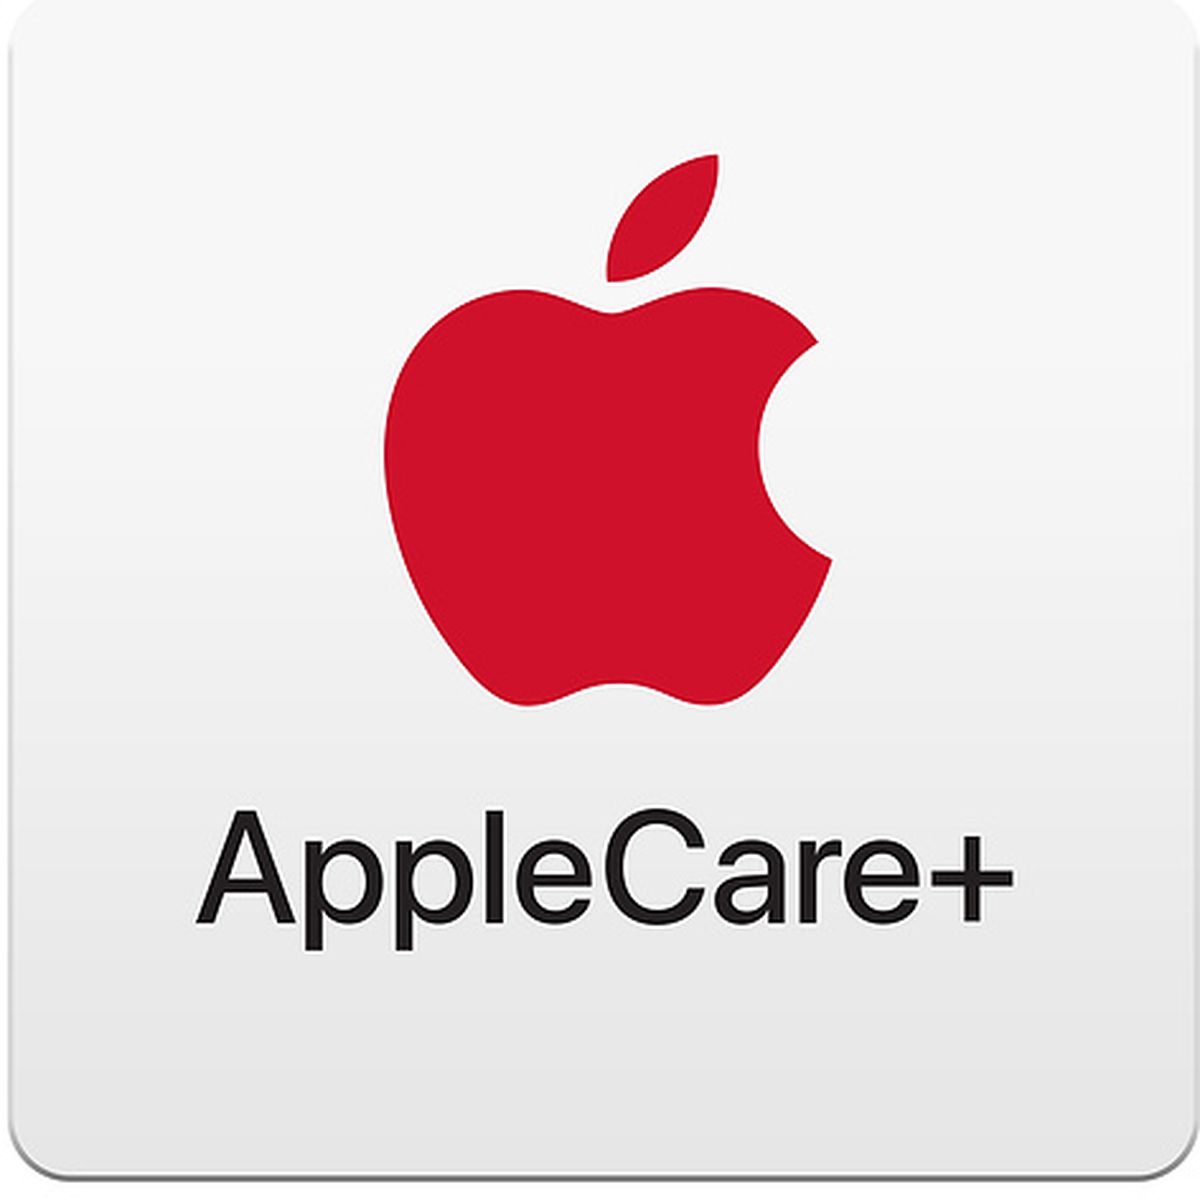 AppleCare+ for iPad Pro 12.9 (4th gen and earlier)